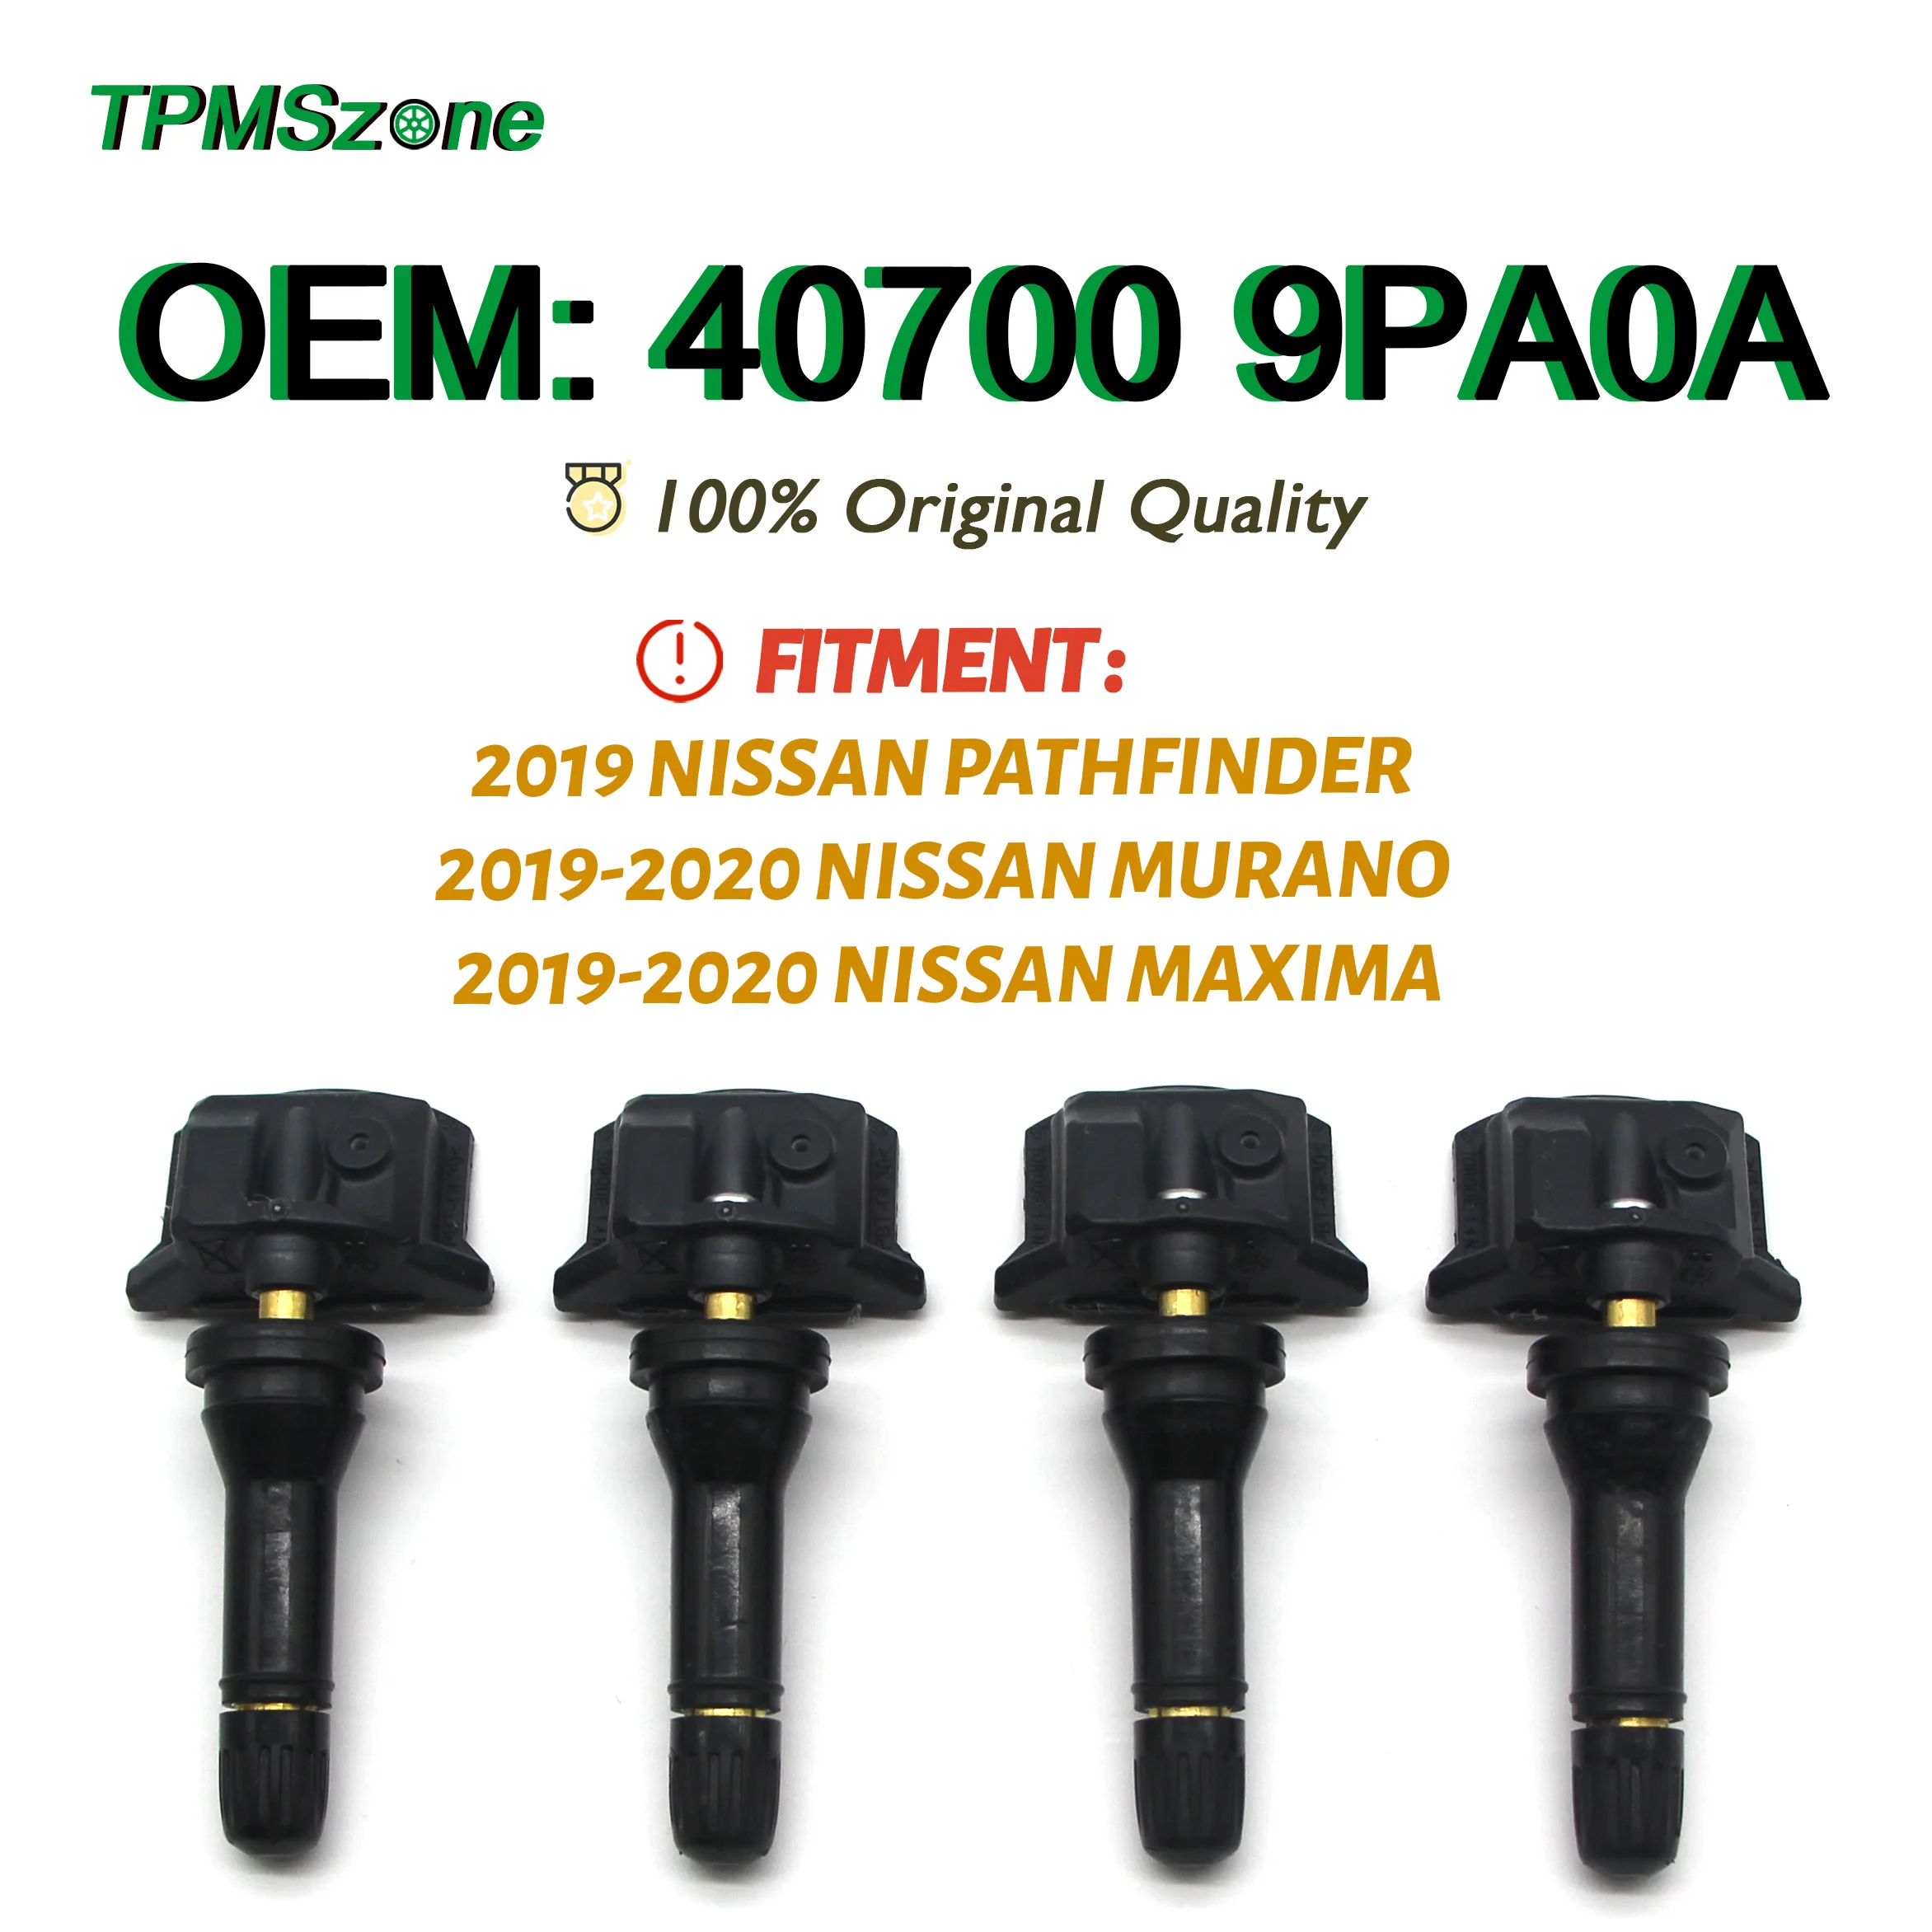 

TPMS 407009PA0A Tire Pressure Monitoring System 433MHz For Nissan Pathfinder Murano Maxima 40700-9PA0A Tyre Air Monitor Sensor